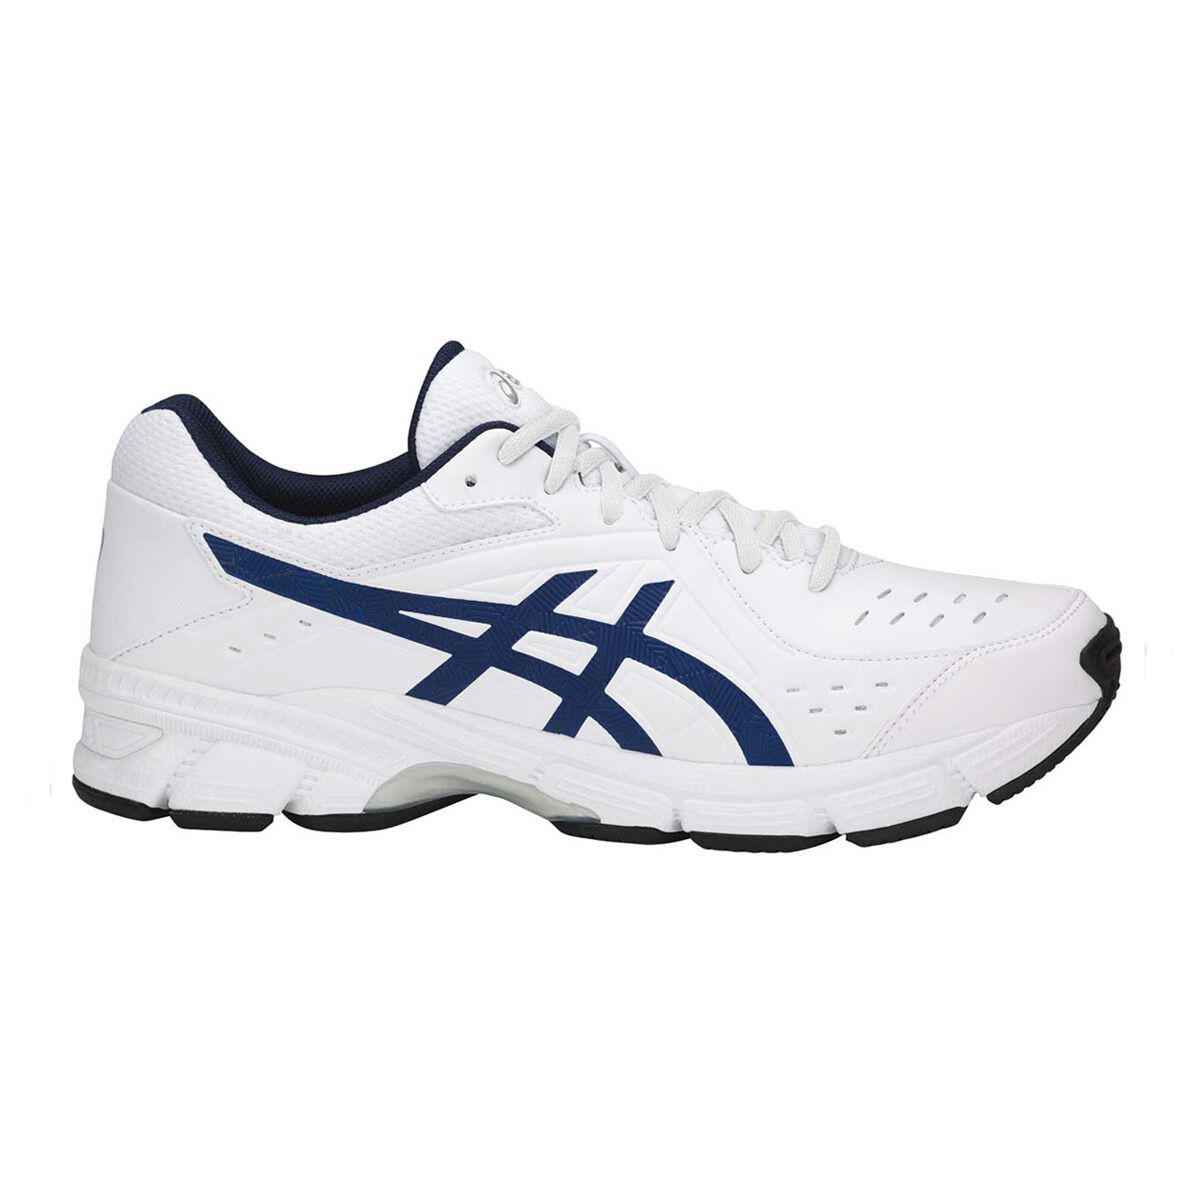 asics leather tennis shoes